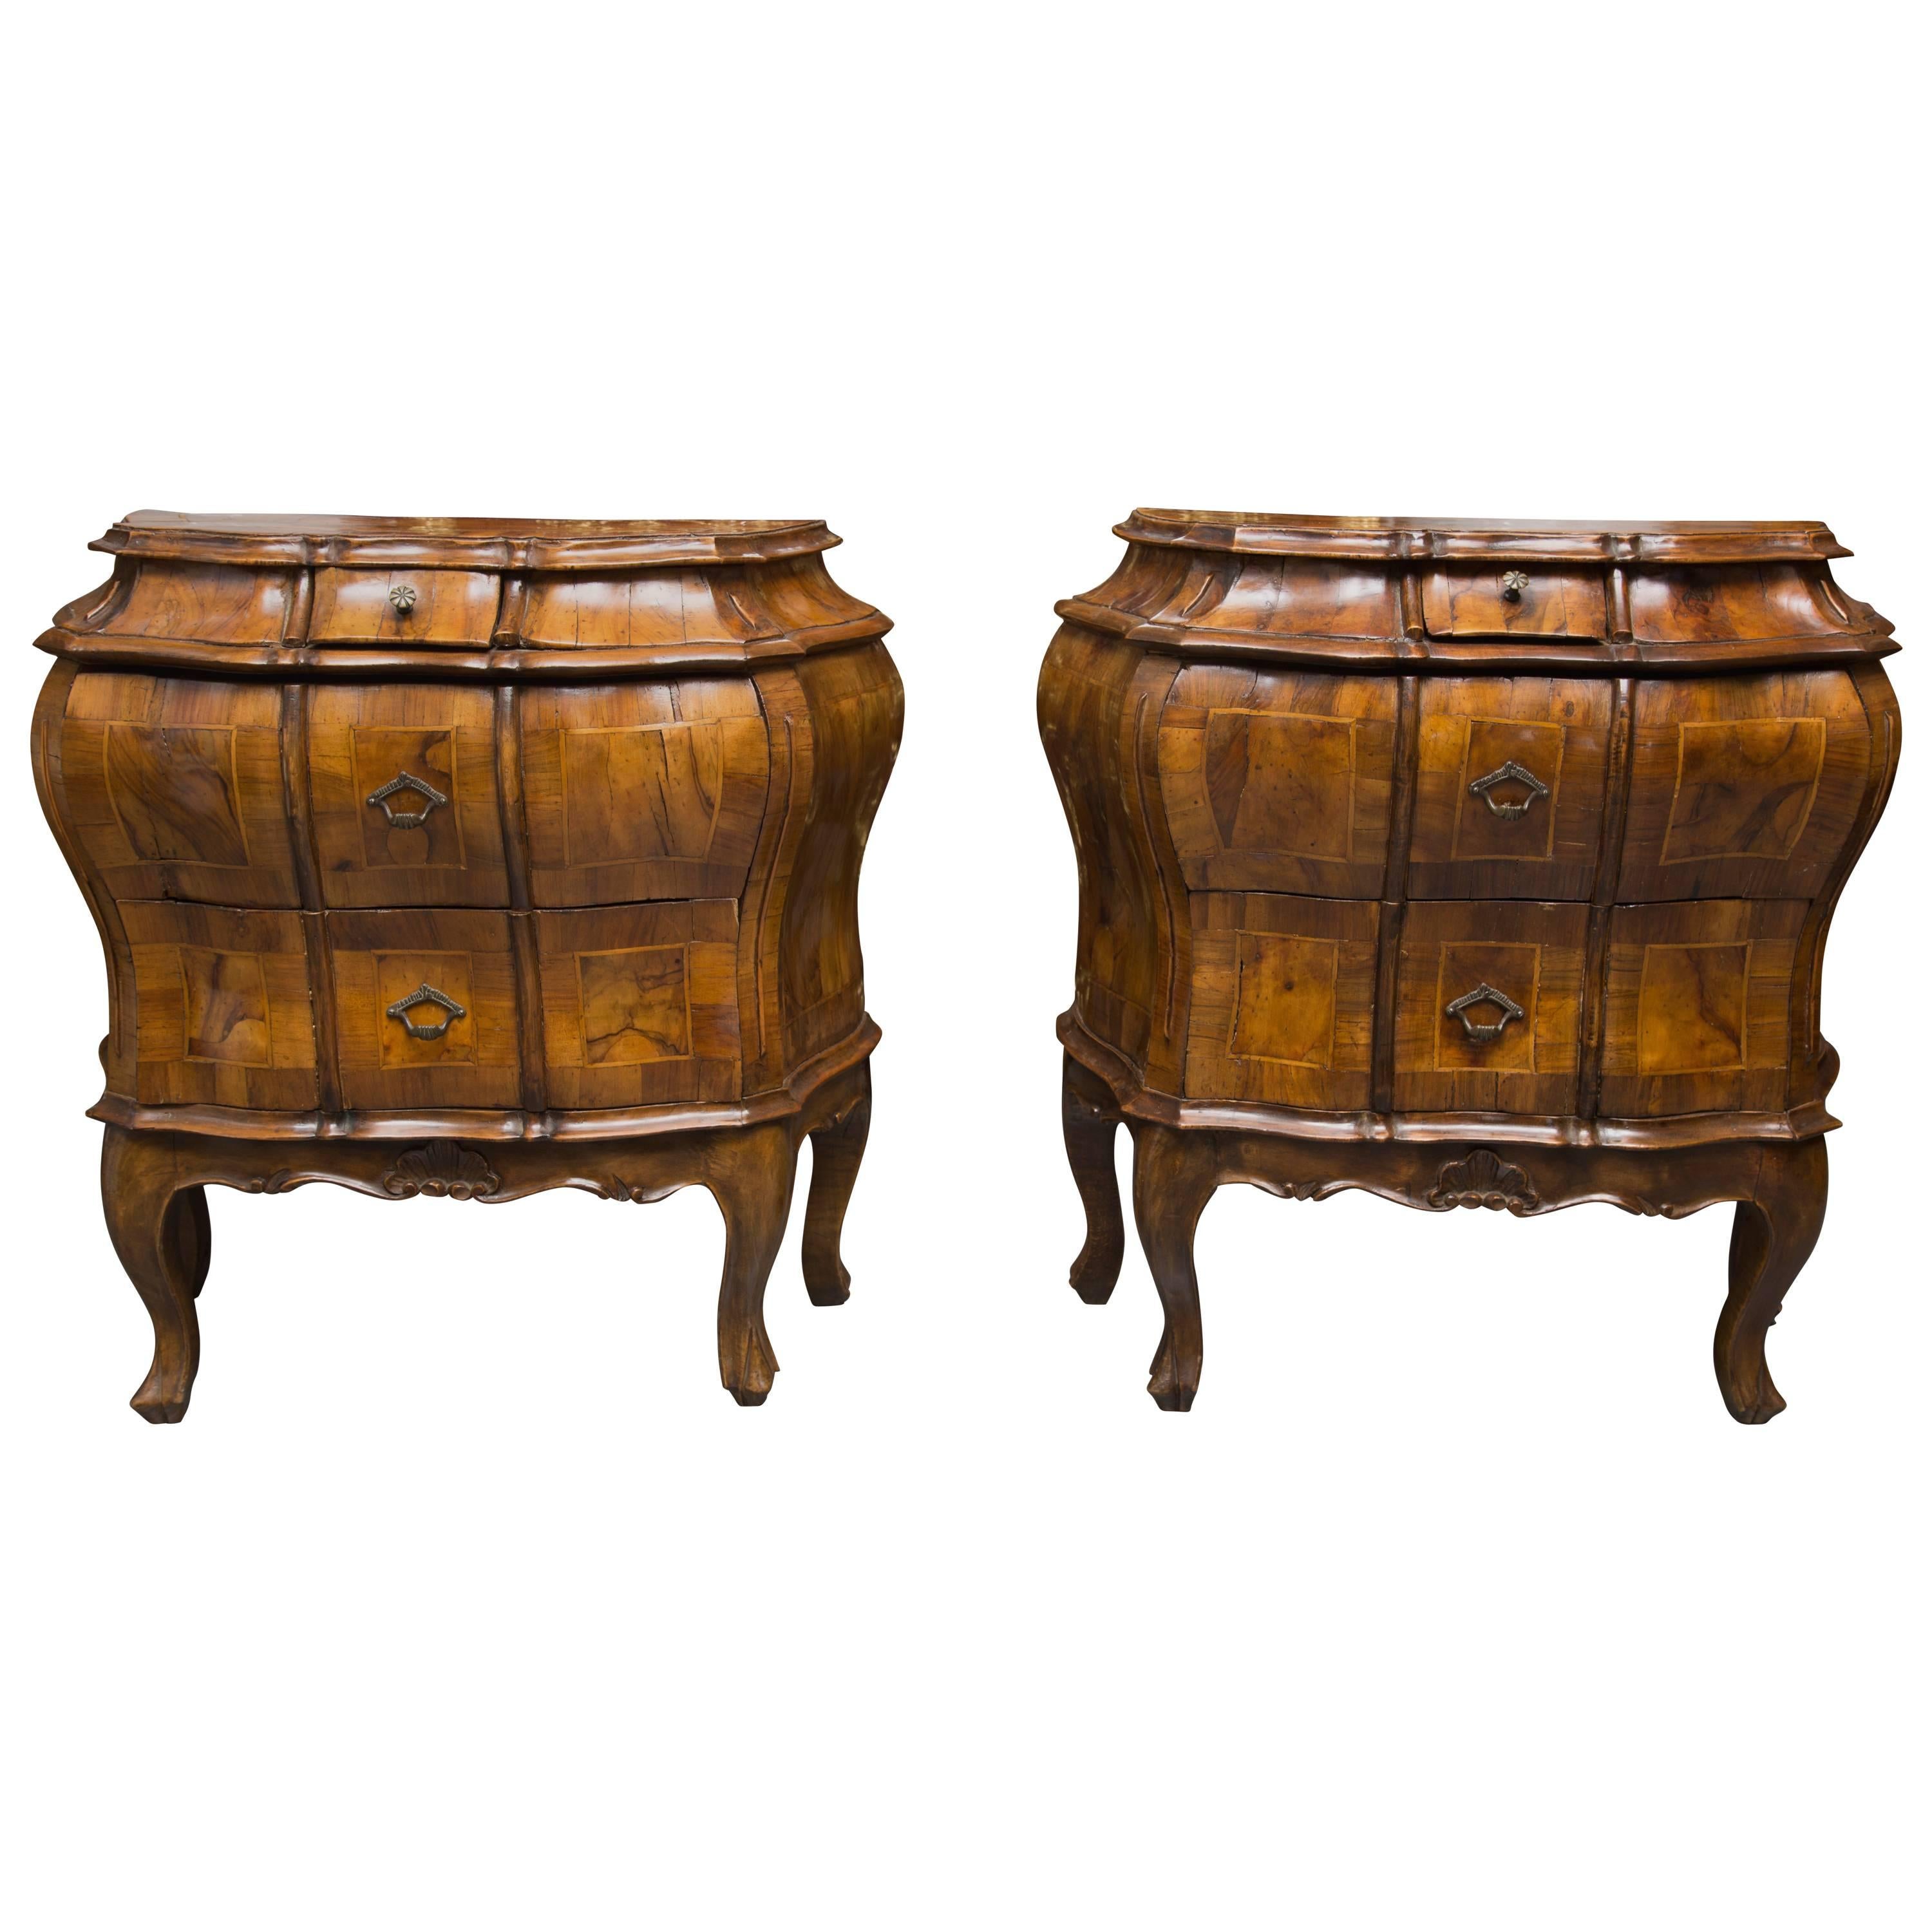 19th Century Pair of Italian Rococo Style Walnut Commodes For Sale